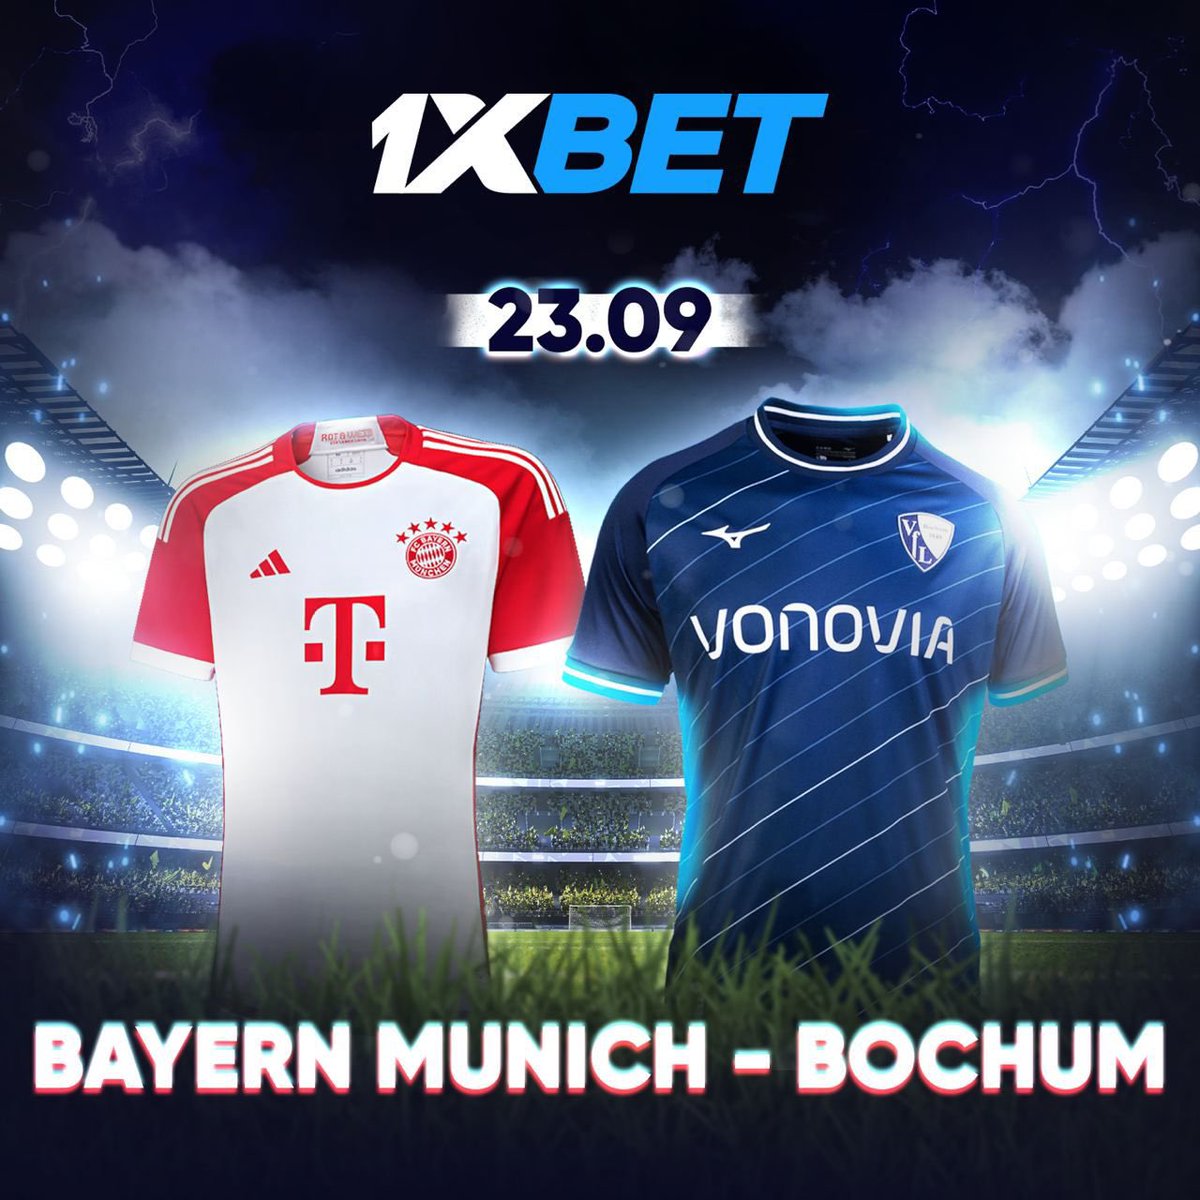 🔥🇩🇪Allianz Arena Collide: Bayern – Bochum

Make your choice and enjoy Bundesliga with 1xBet!

Using the link ➡️ bit.ly/447KINS and promo code: FRANKCUTEX for bonus on your win ⚽️